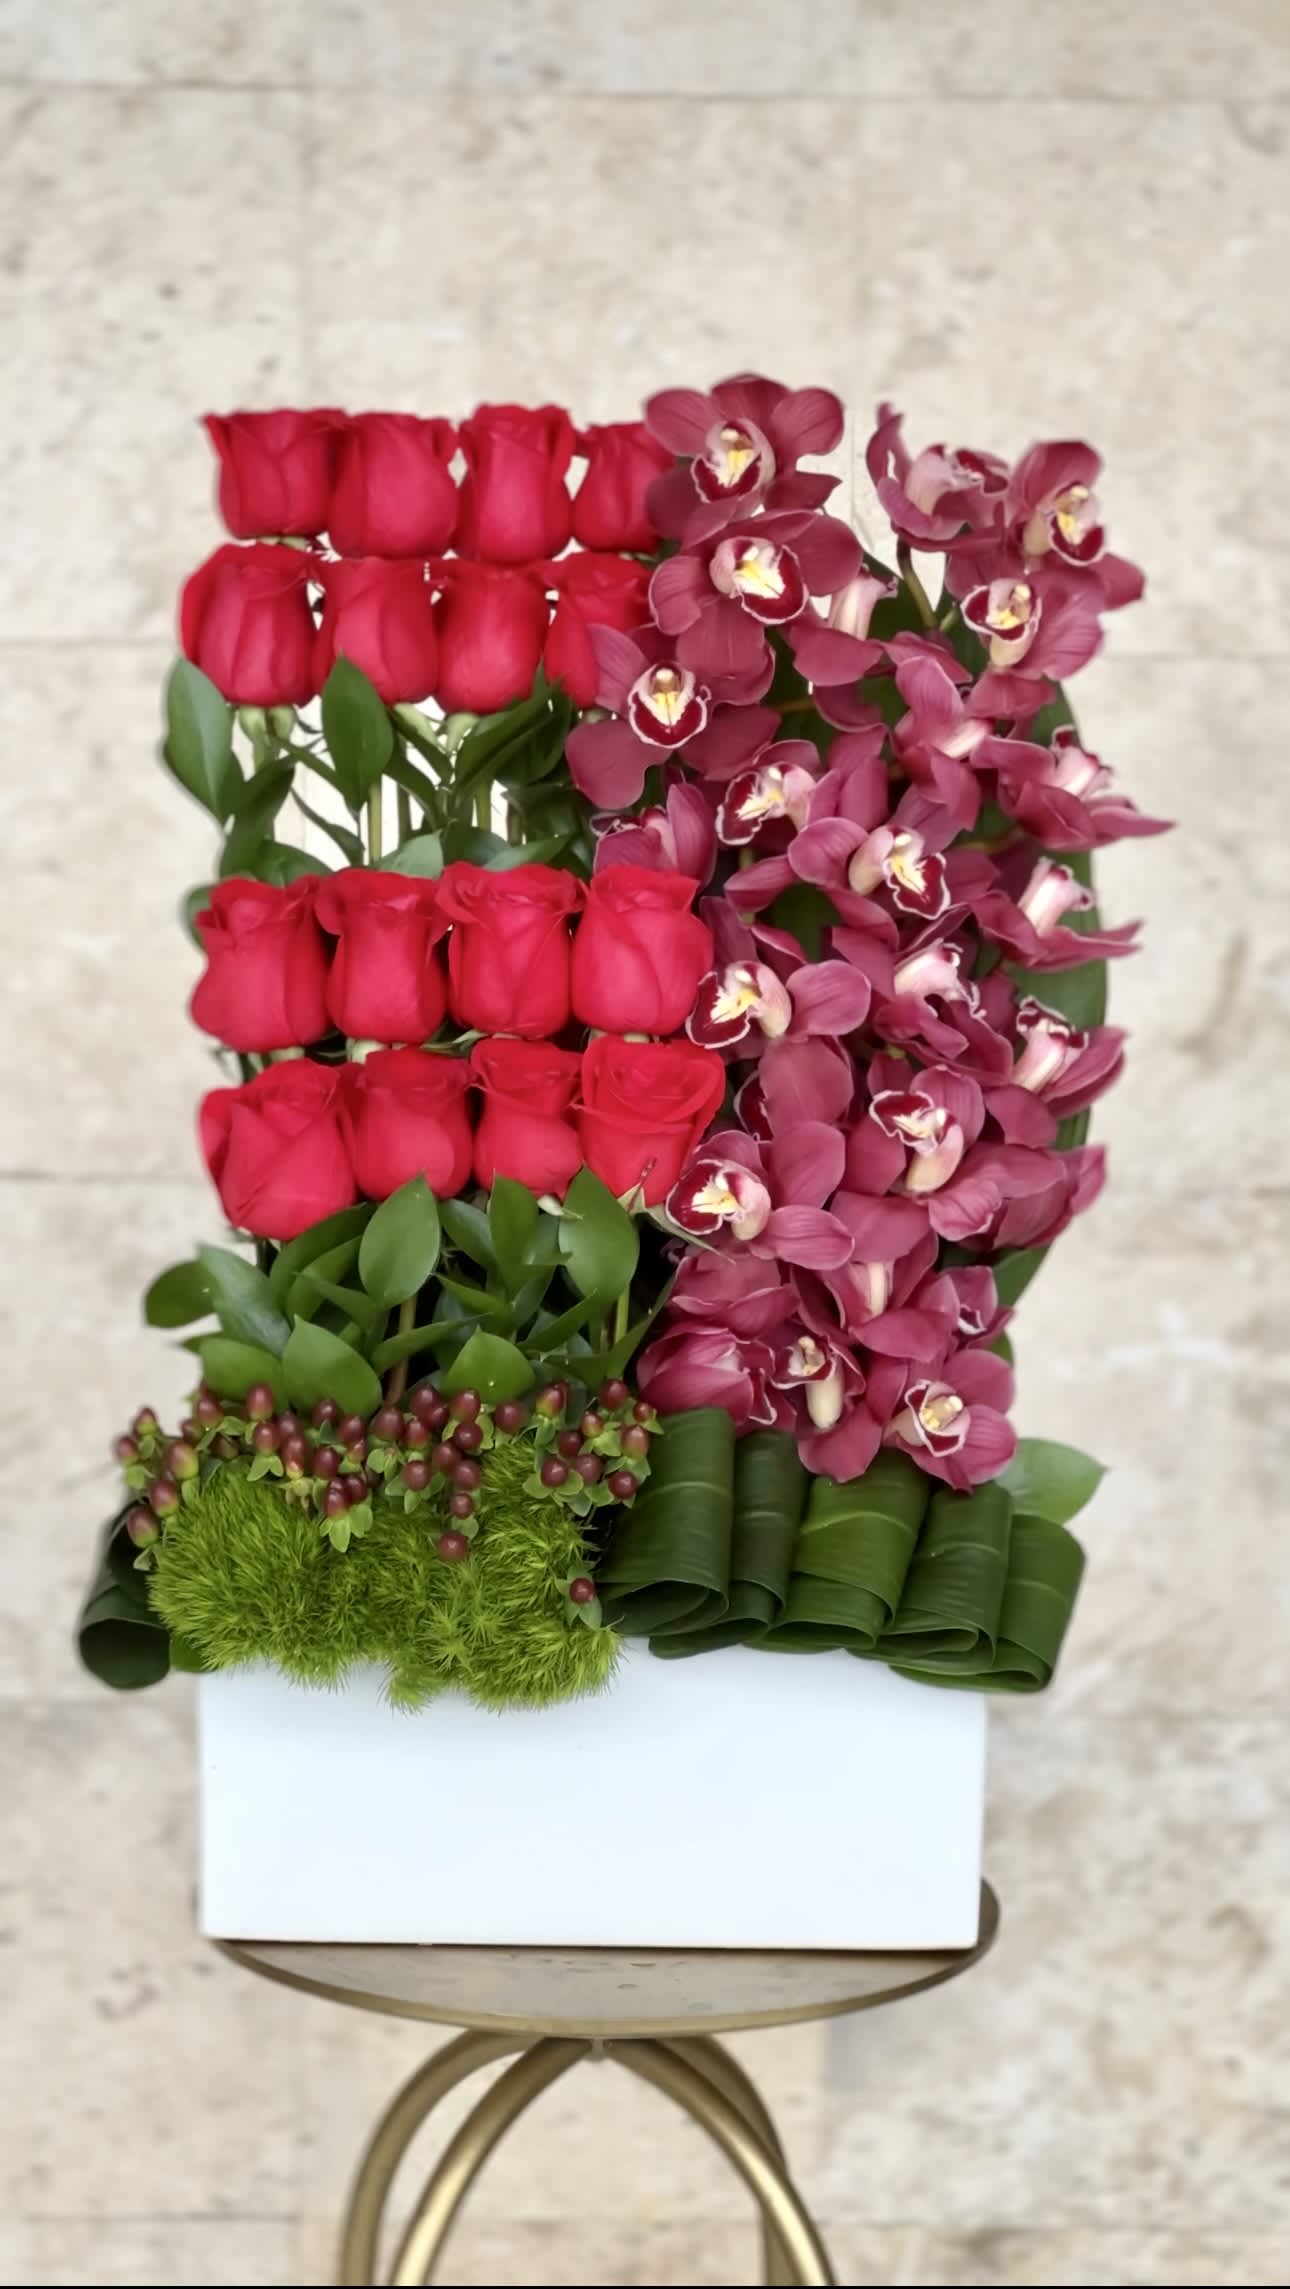 My one and only - If you're looking for the perfect way to show your special person how much you care, there's no better way than with this one and only flower arrangement.  Filled with premium blooms 